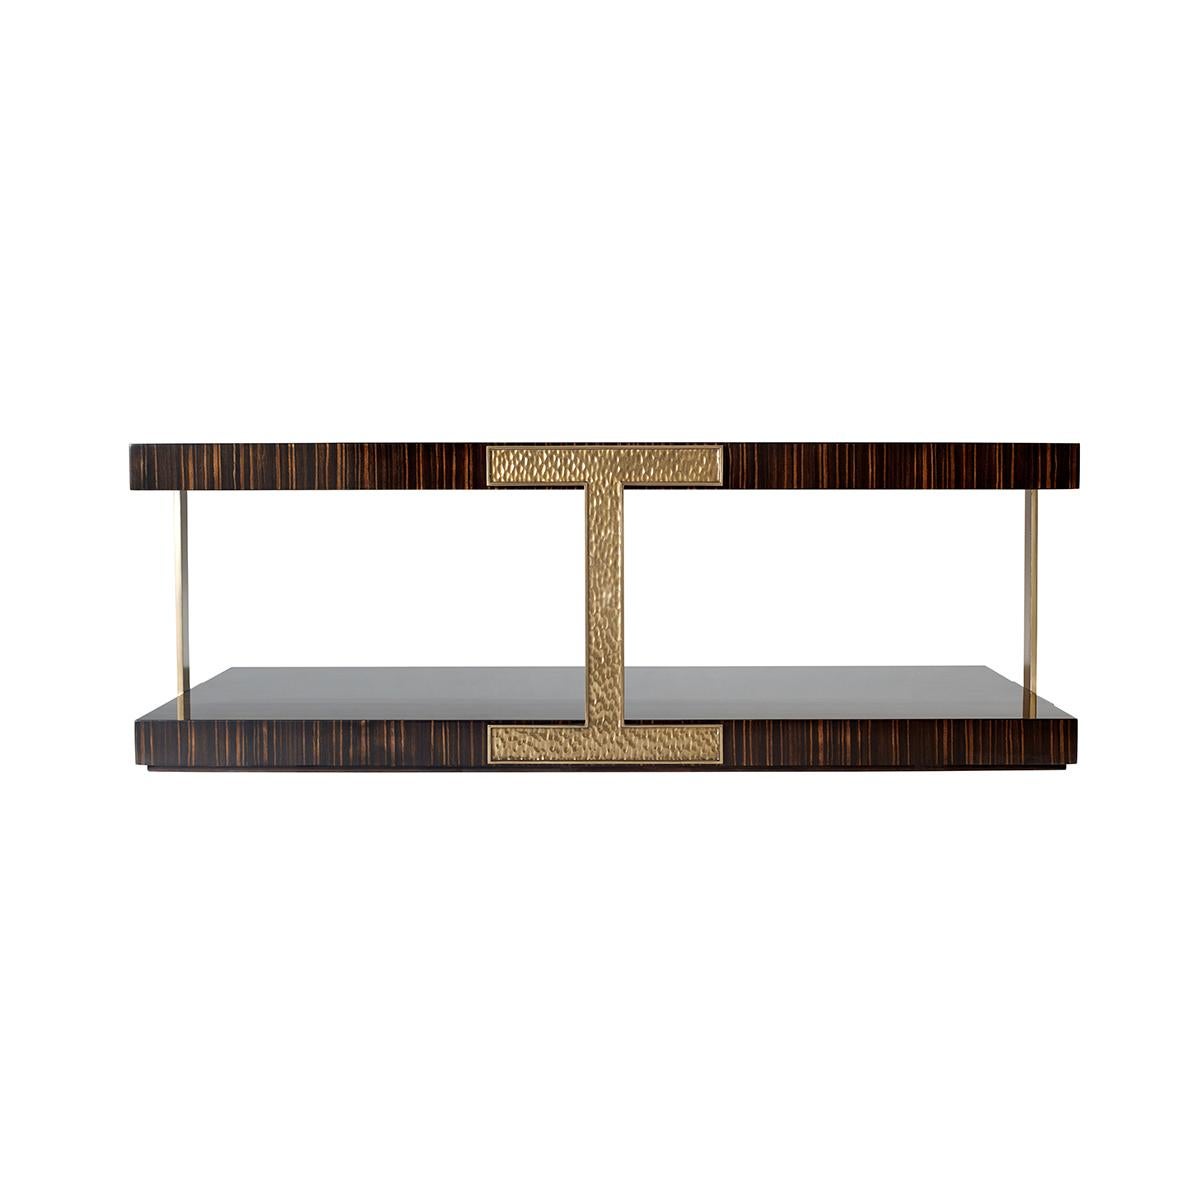 A modern rectangular coffee table crafted with simulated ebony veneer with an Amara finish and hammered brass finish metal accents. 

Dimensions: 52